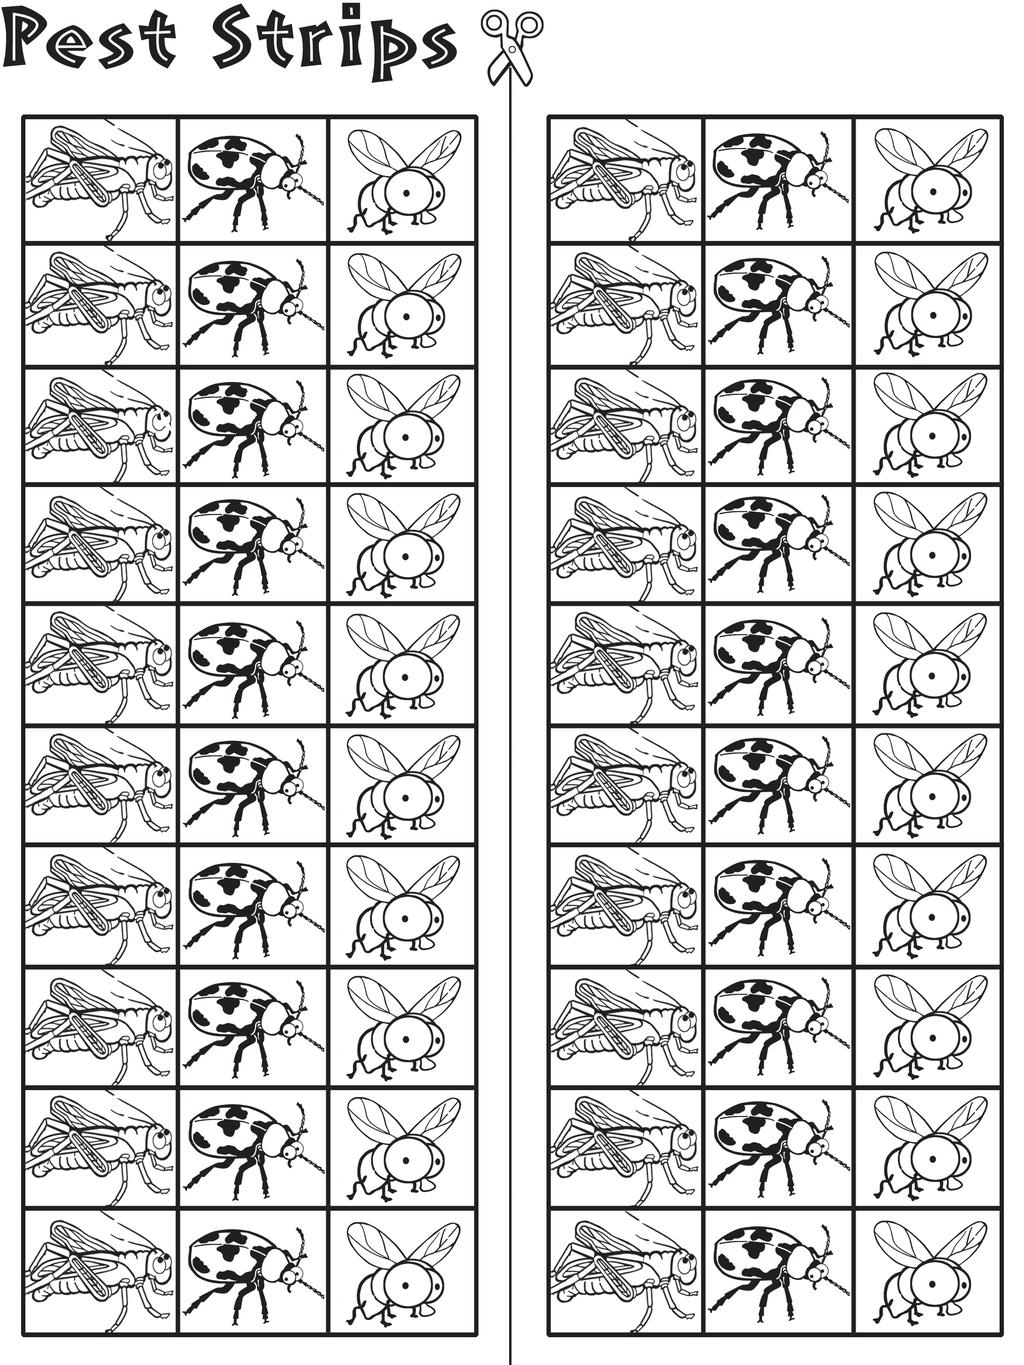 Record the number of times you caught each bug by coloring in that many squares.